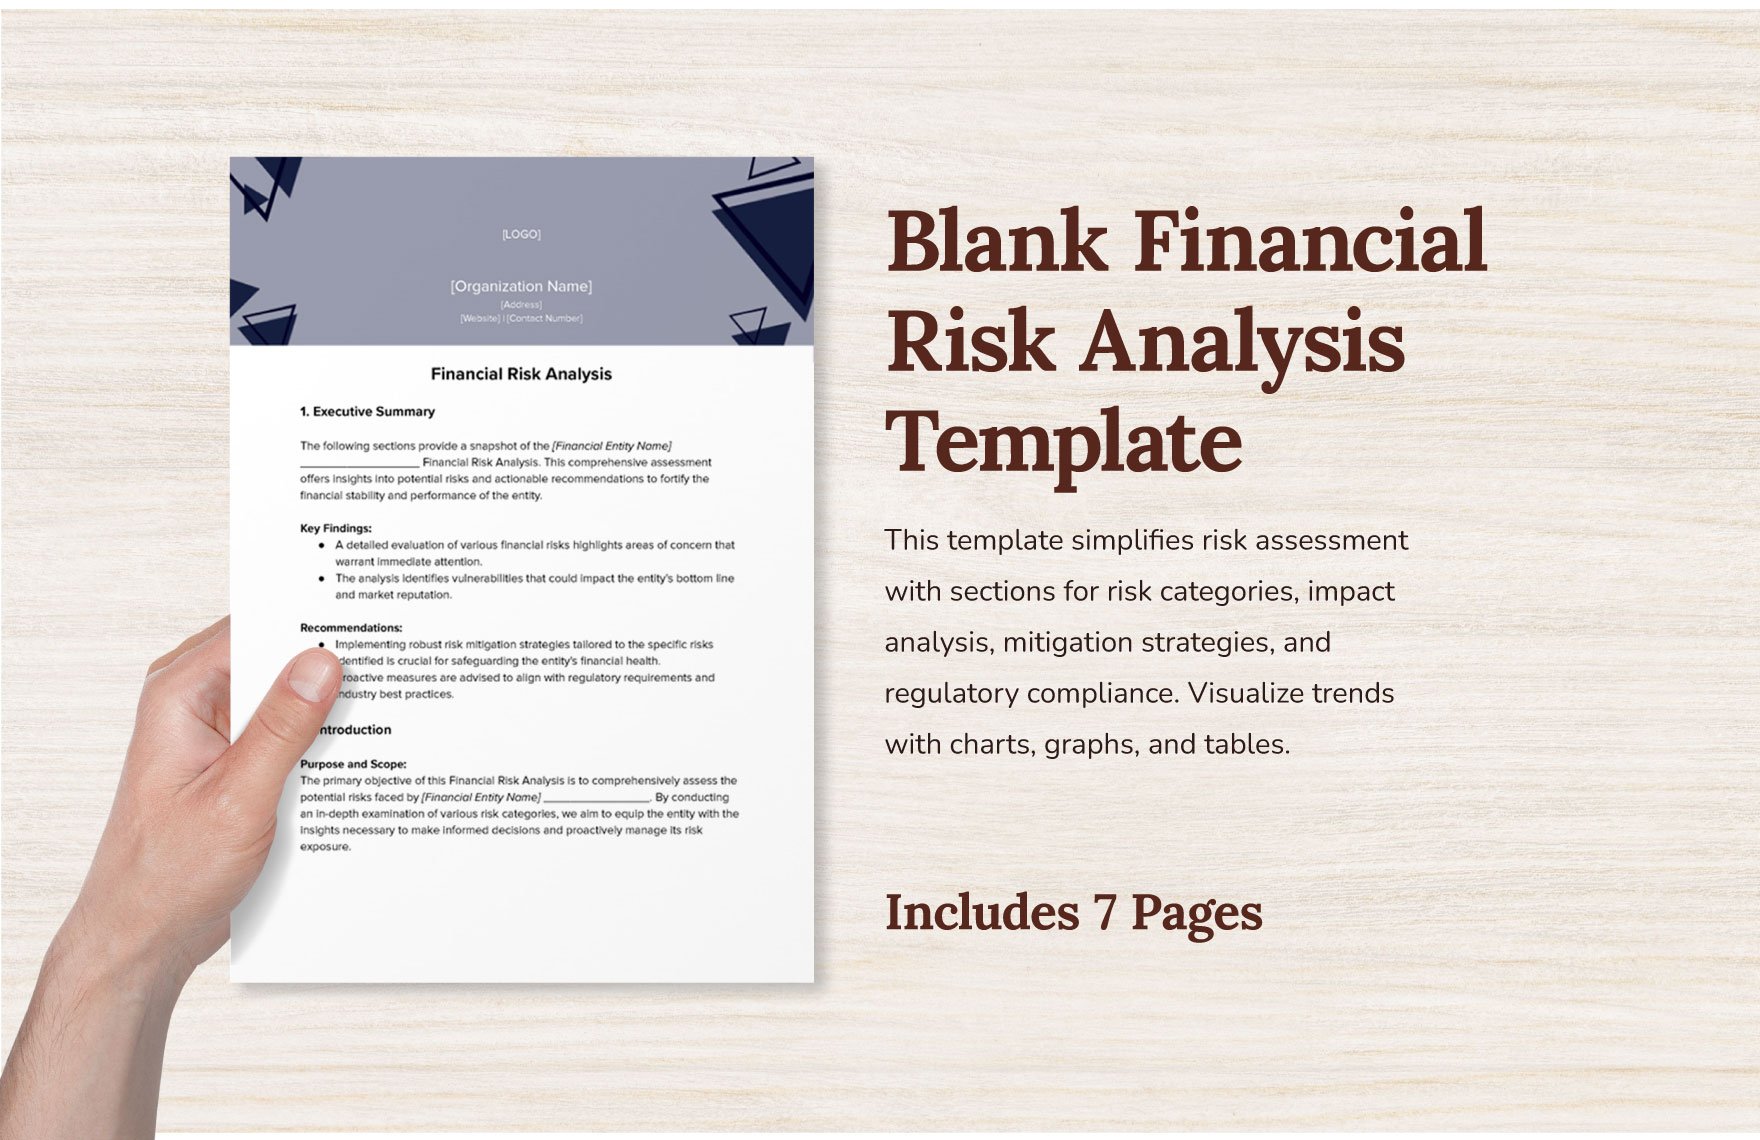 Blank Financial Risk Analysis Template